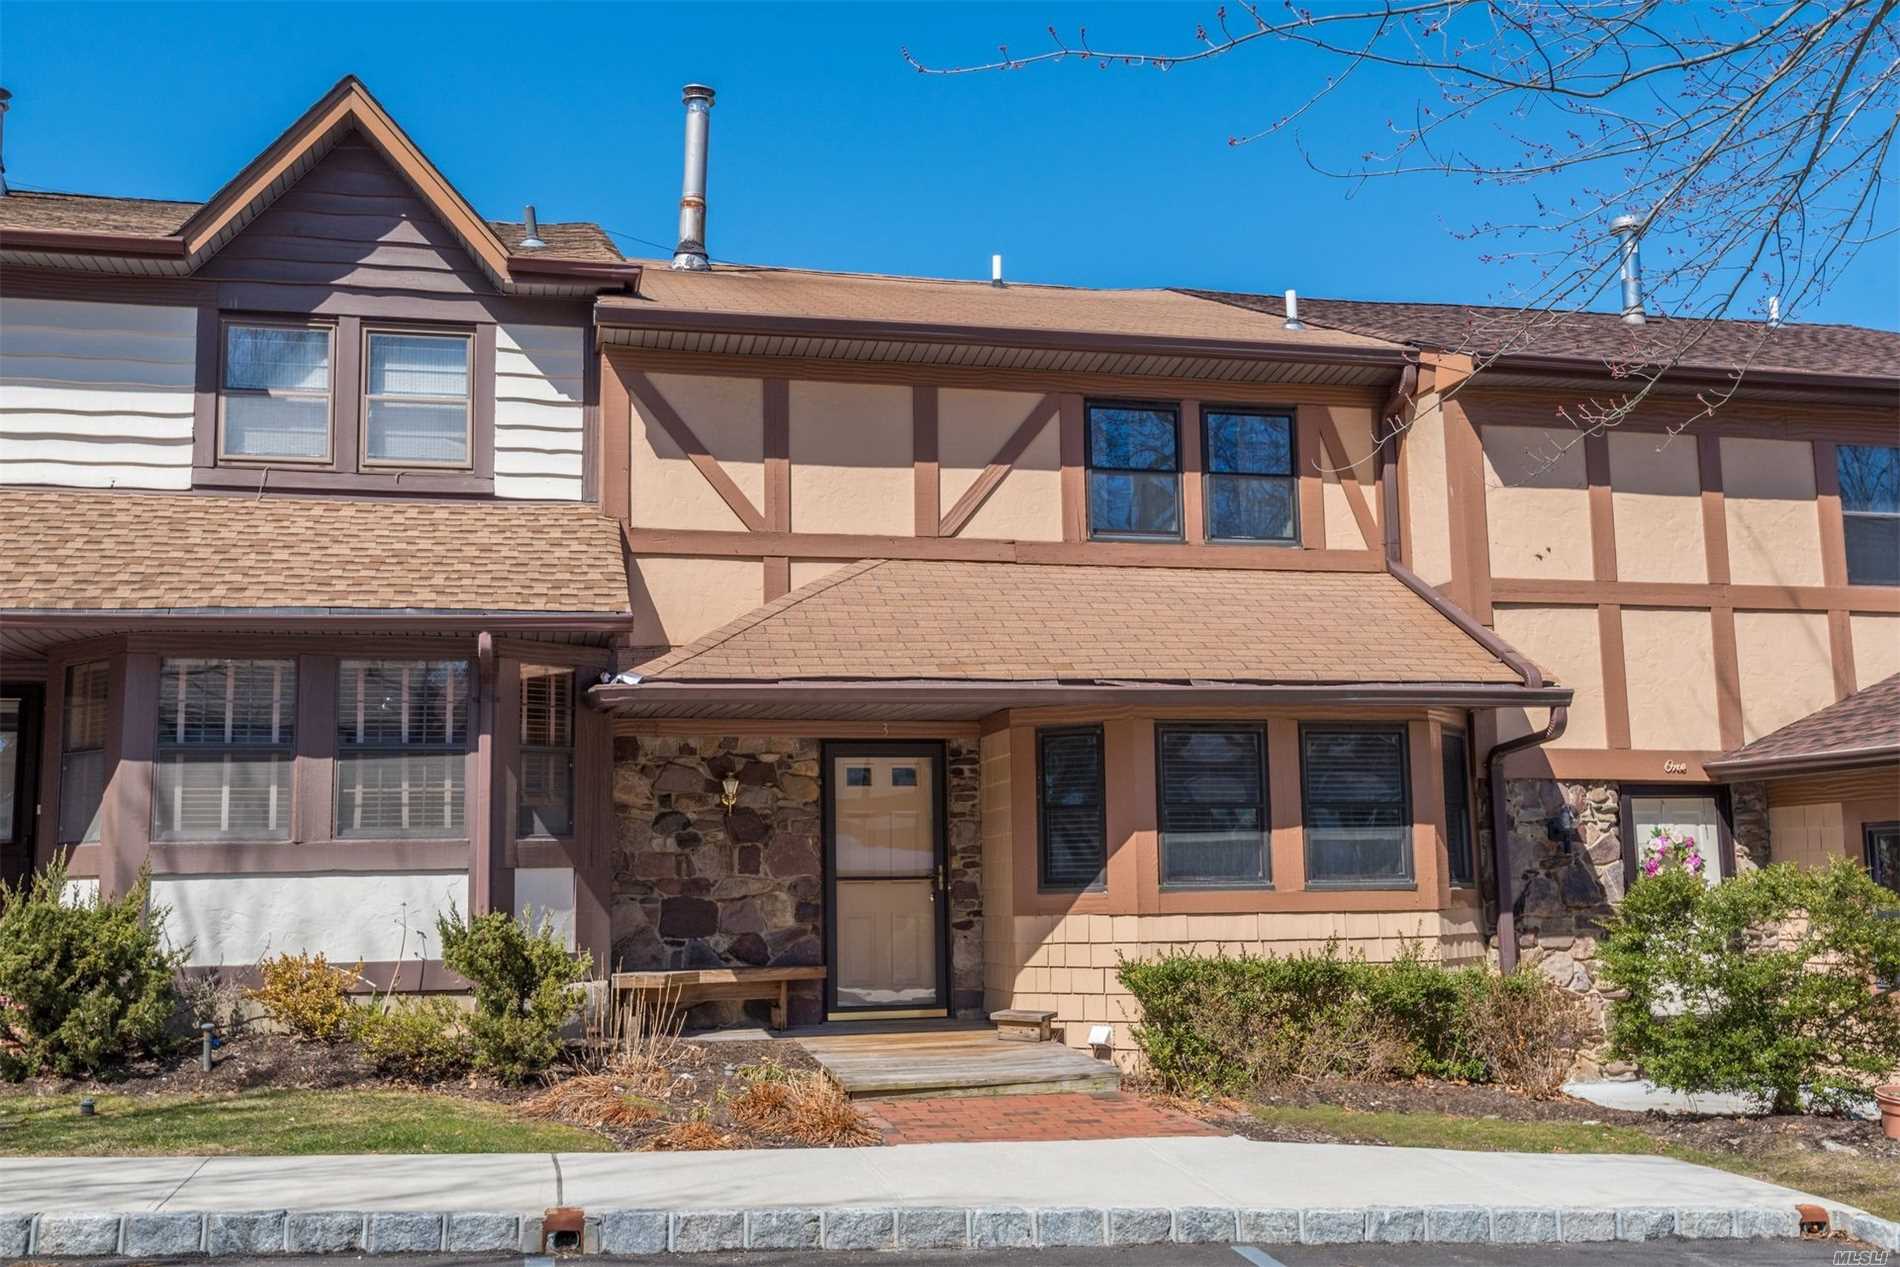 Rare Find In Woodbury Village With Sought After Full, Finished Basement. Eat In Kitchen With L-Shaped Lr/Dr, Stone, Wood Burning Fireplace In Lr With Sliding Door Opening To Brand New, Over-Sized Deck. Community Pool & Tennis. Low Taxes In Prestigious Syosset Schools. Will Not Last!